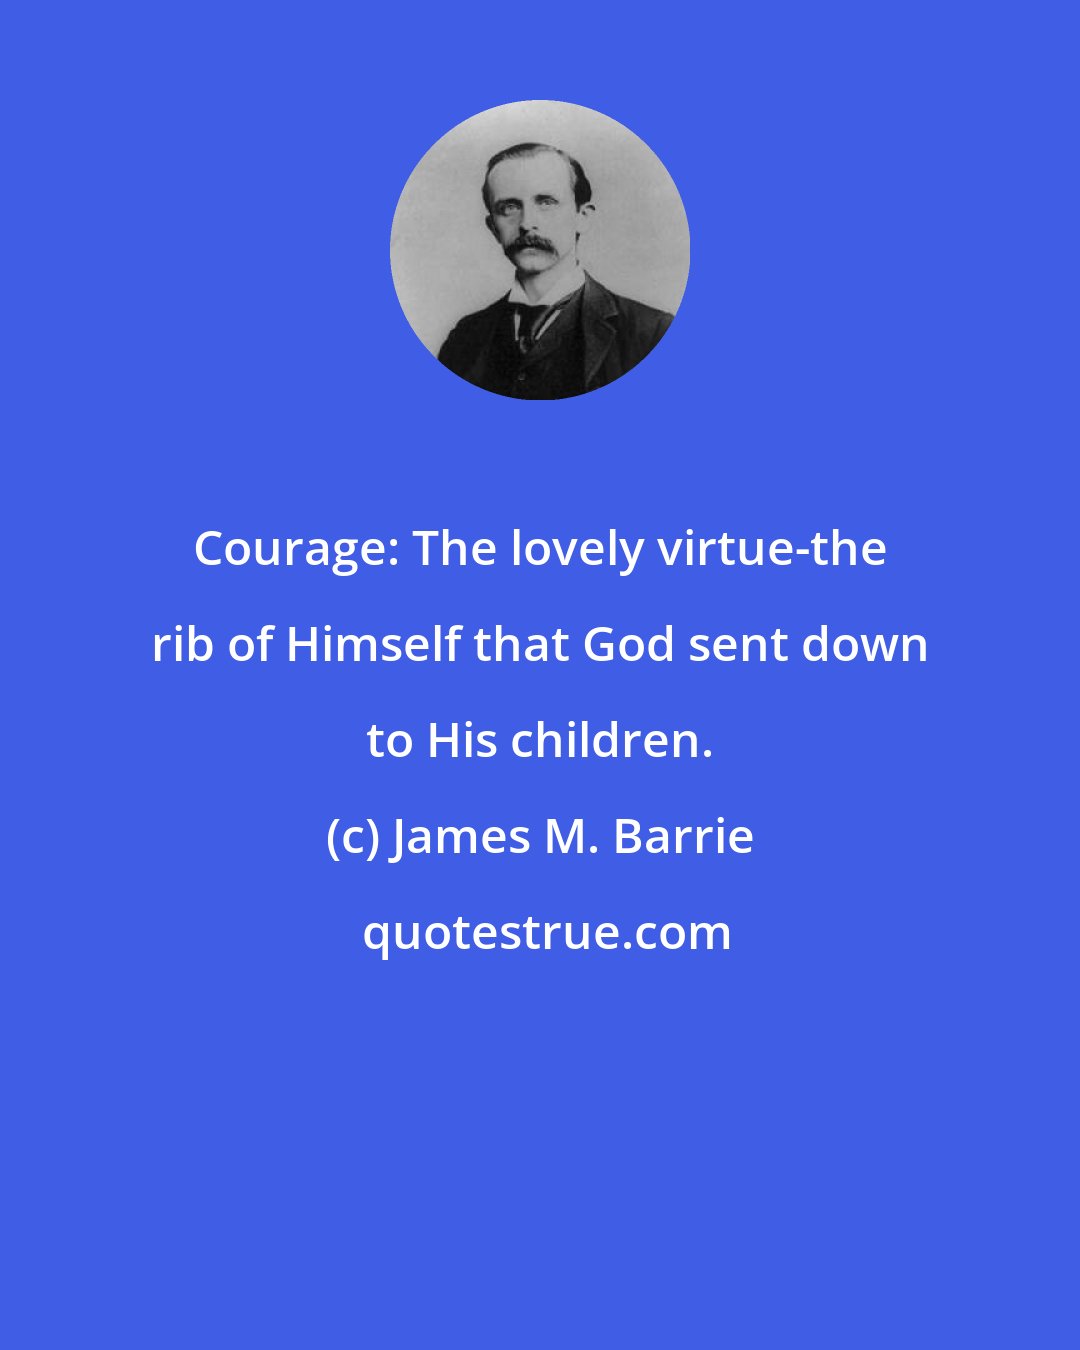 James M. Barrie: Courage: The lovely virtue-the rib of Himself that God sent down to His children.